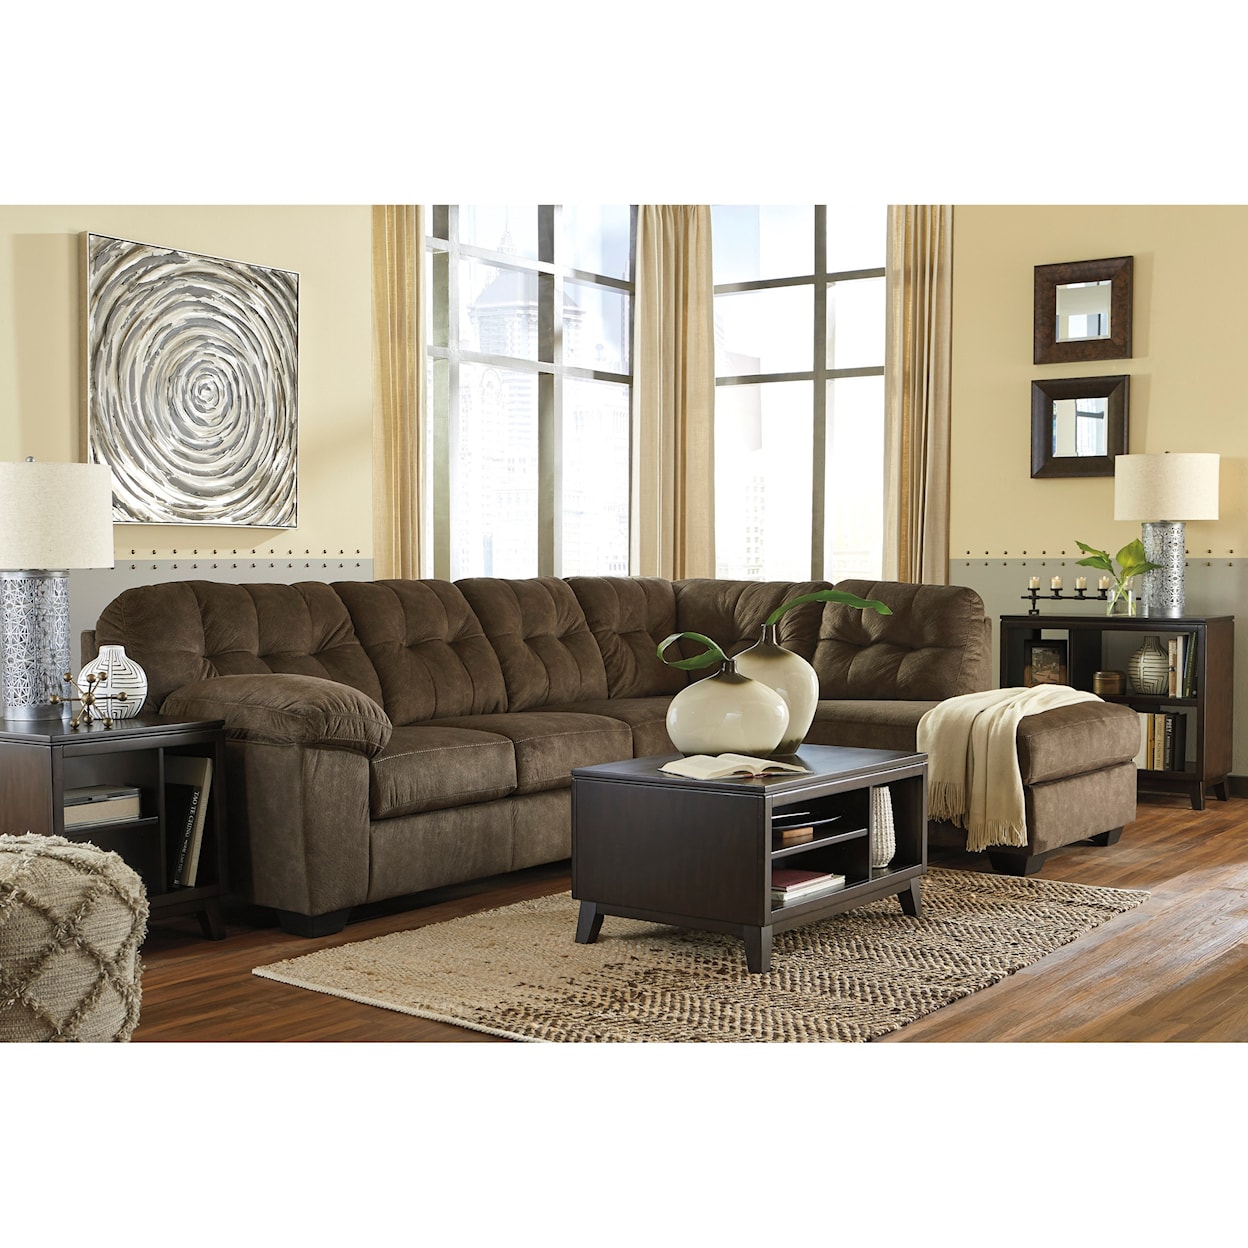 Signature Design by Ashley Furniture Accrington Sectional with Right Chaise & Queen Sleeper